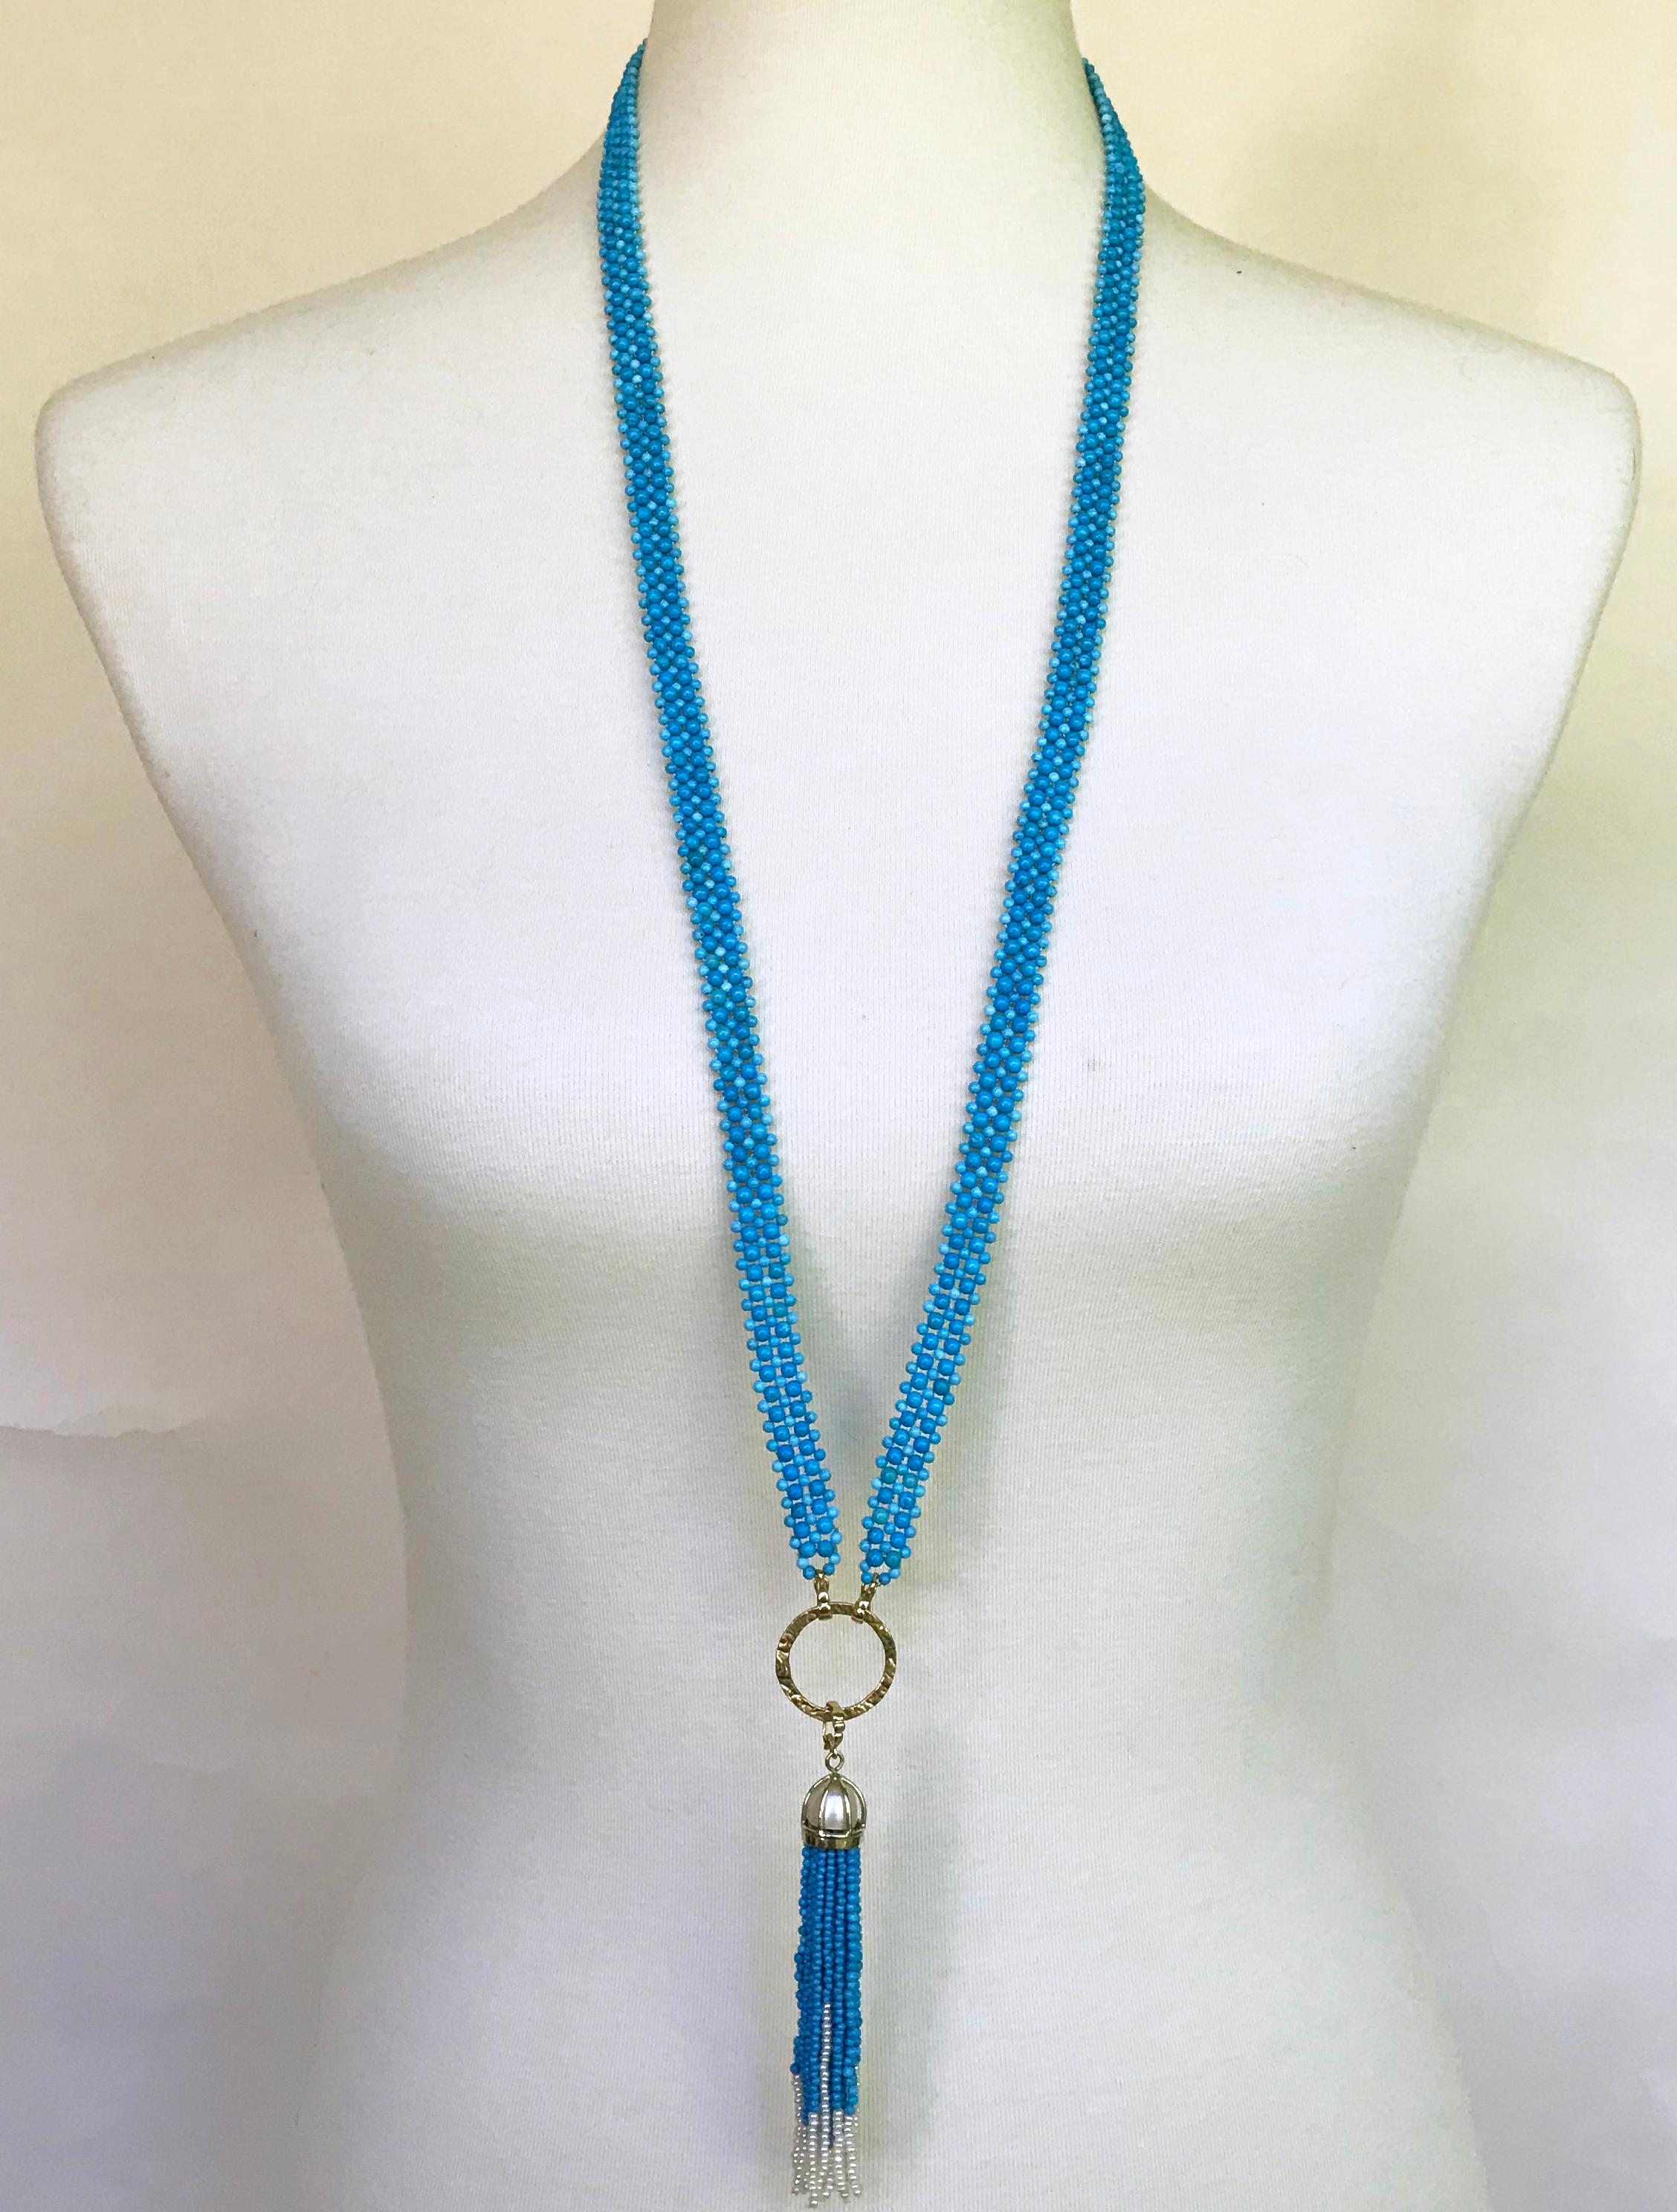 This unique lace-like woven turquoise necklace with pearls and 14k yellow gold is perfect to enhance any outfit with the vivid and bold colors. Elegant and comfortable, this piece was handwoven by Marina J, creating a style that sits comfortably and